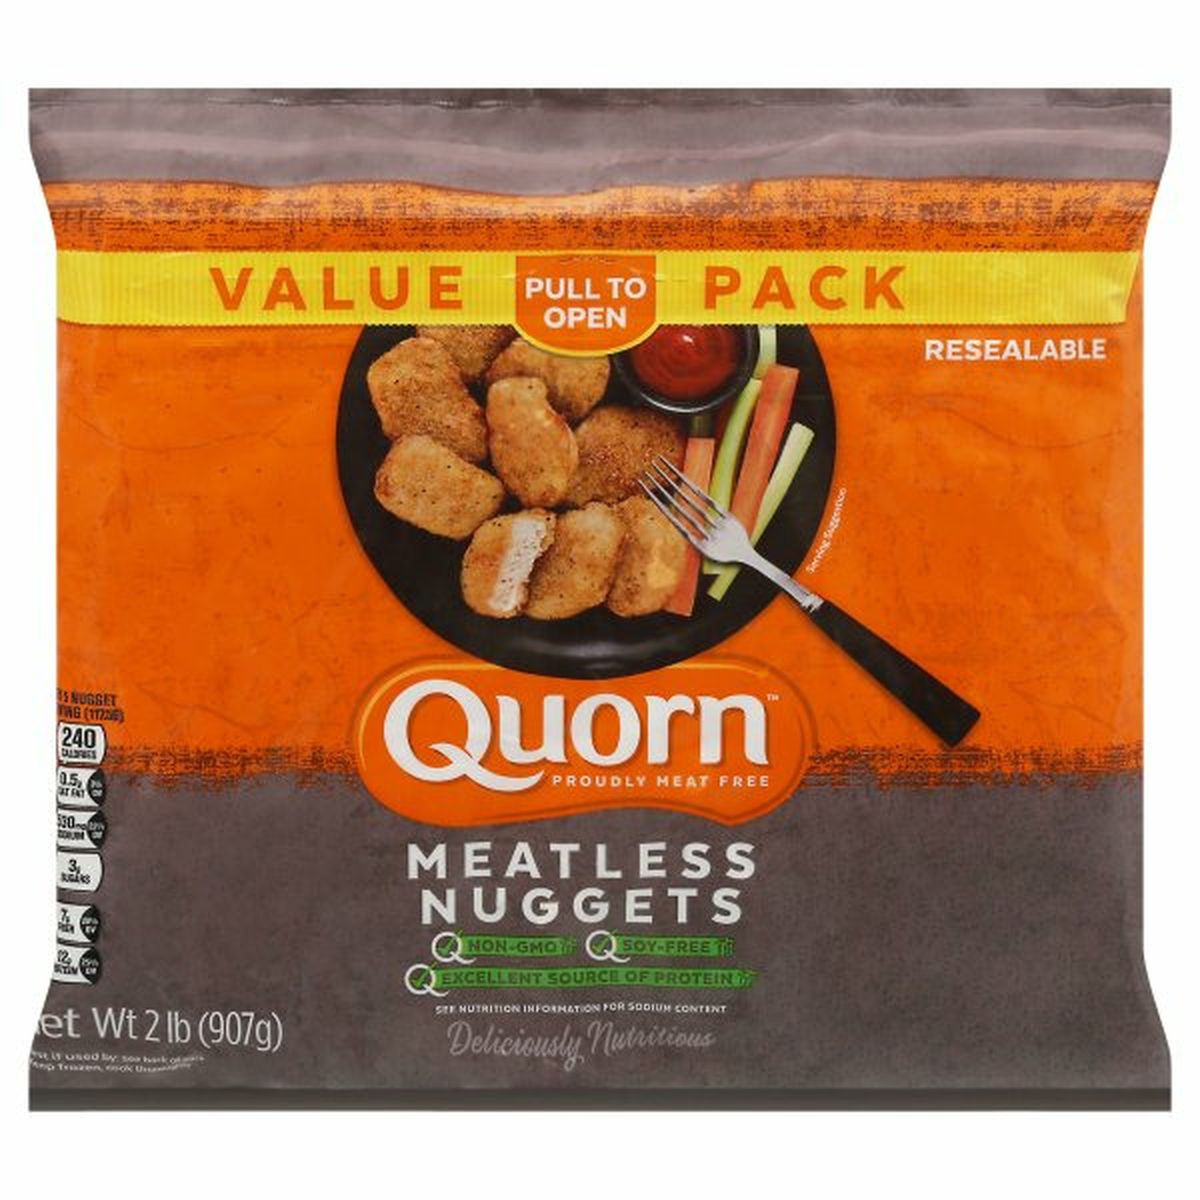 Calories in Quorn Meatless Nuggets, Value Pack